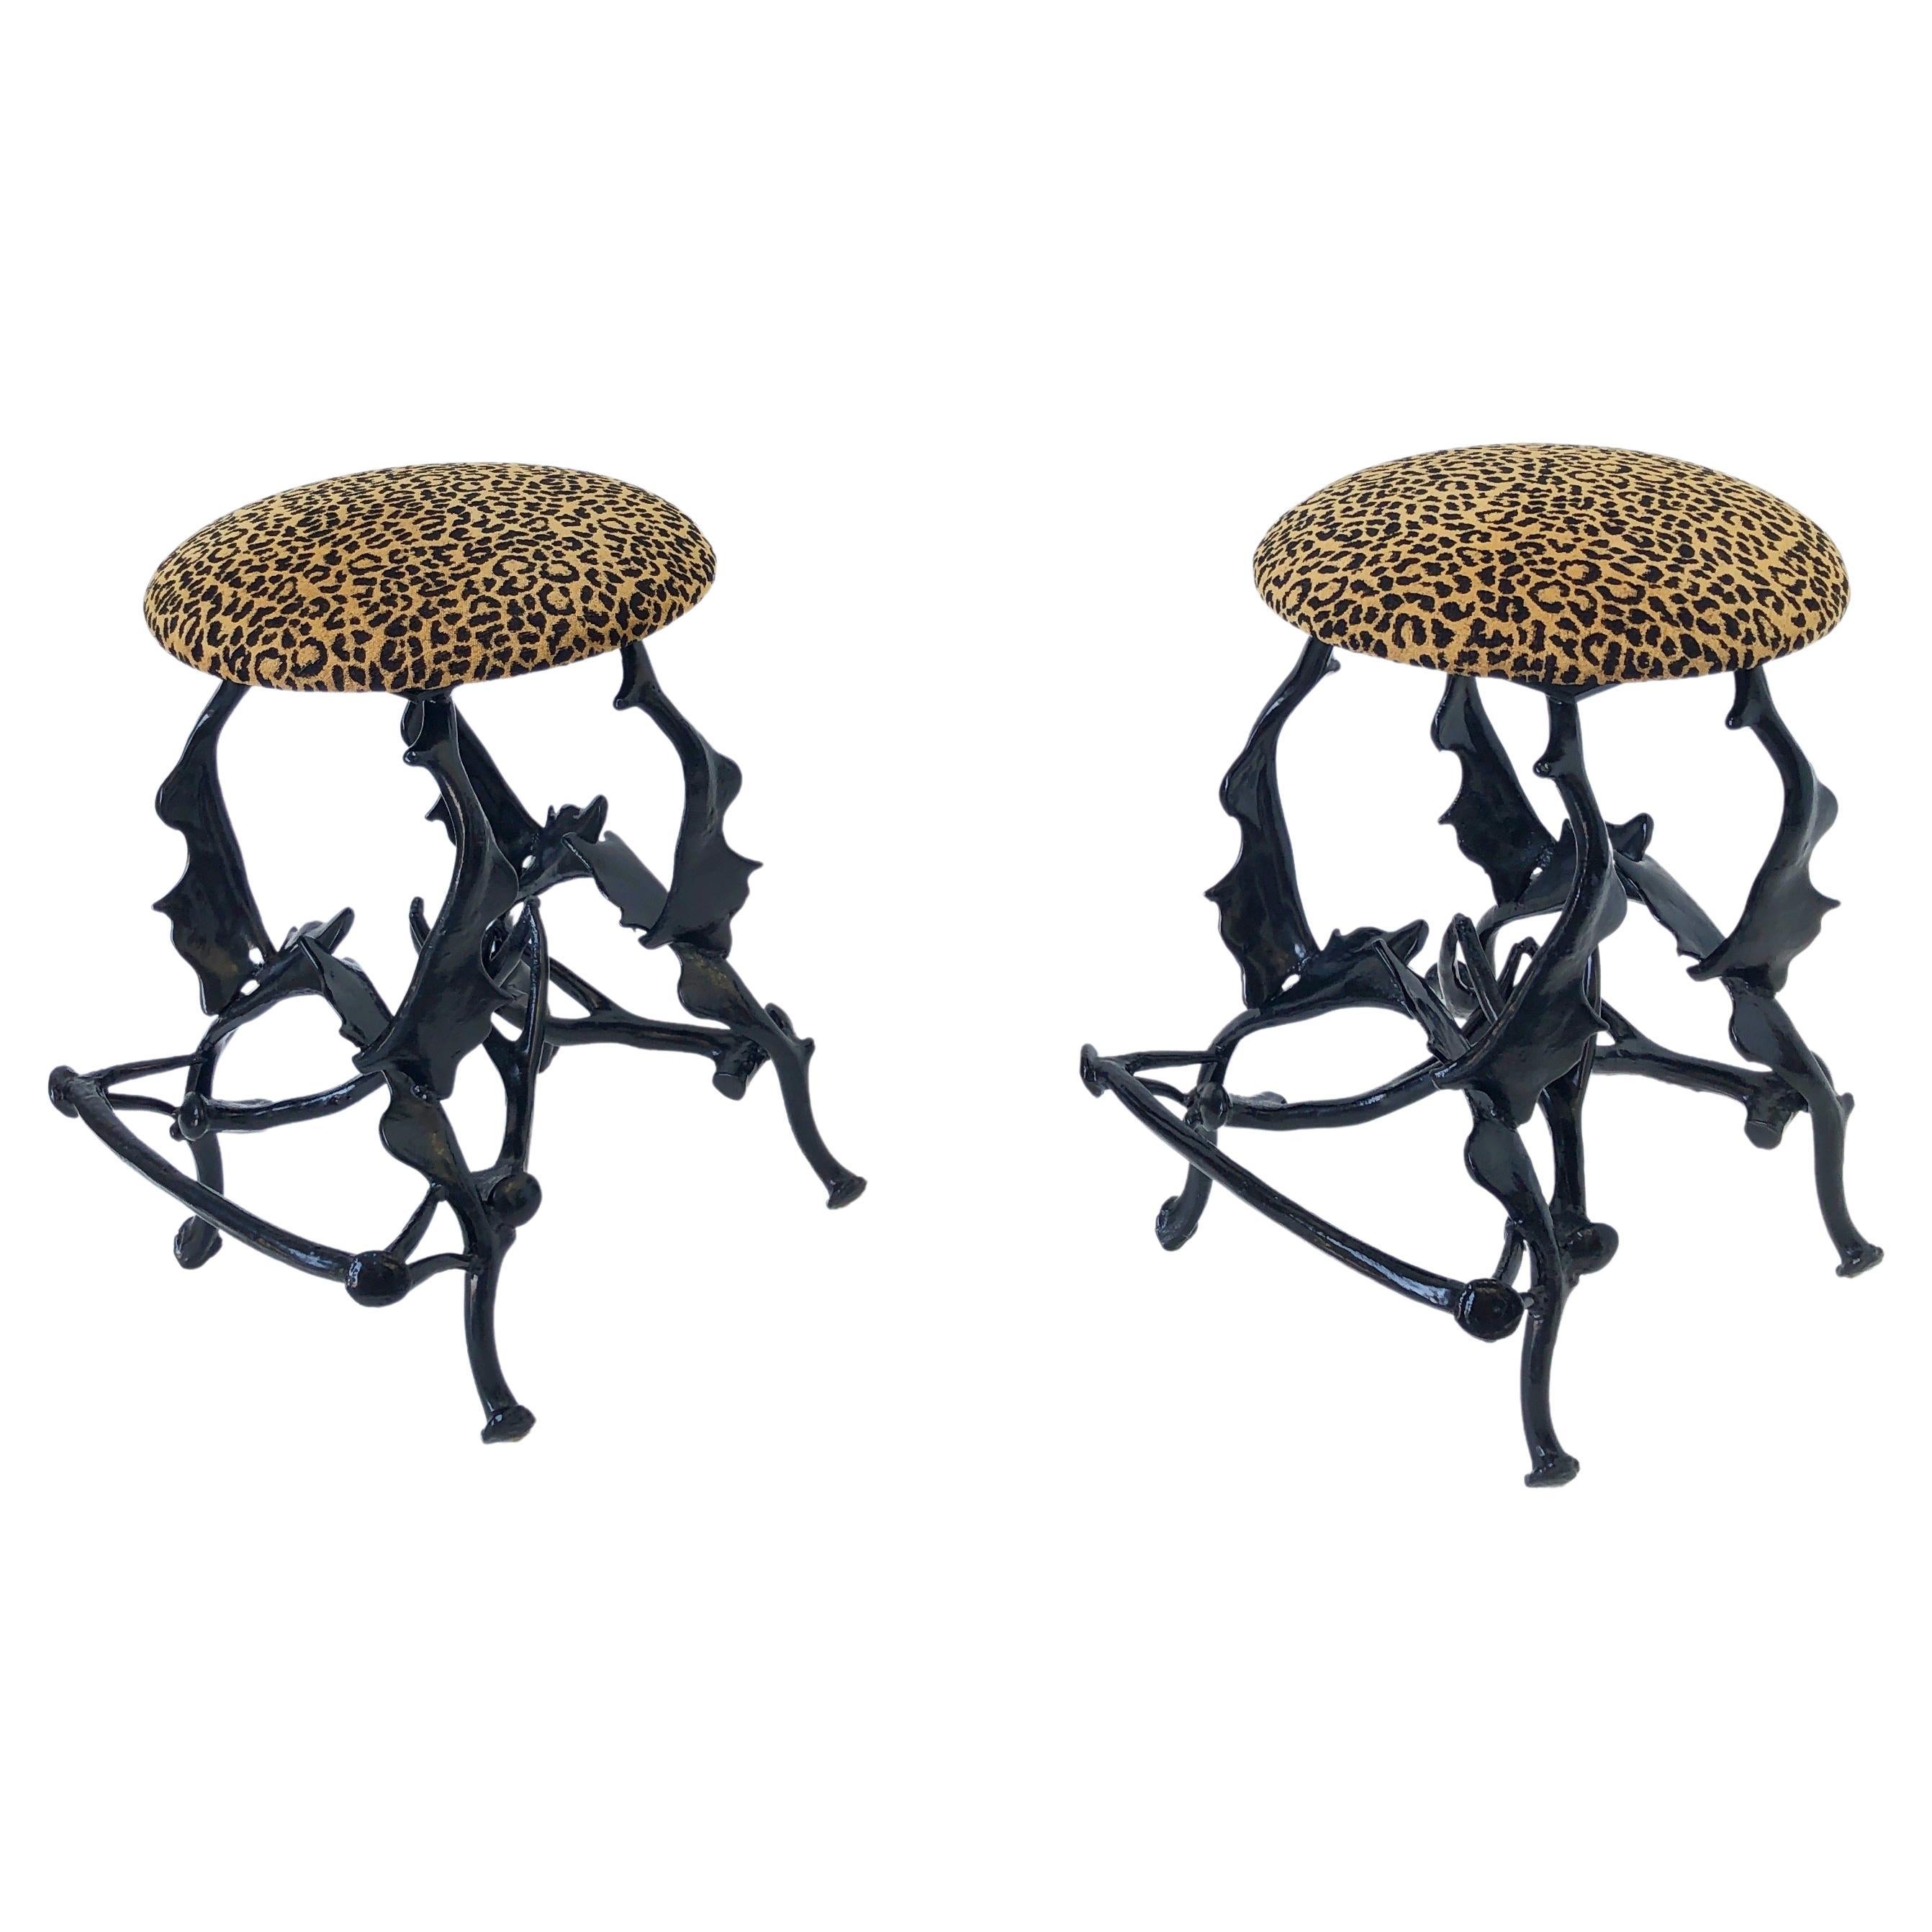 Pair of Black Powder Coated Faux Antler Bar Stools by Arthur Court